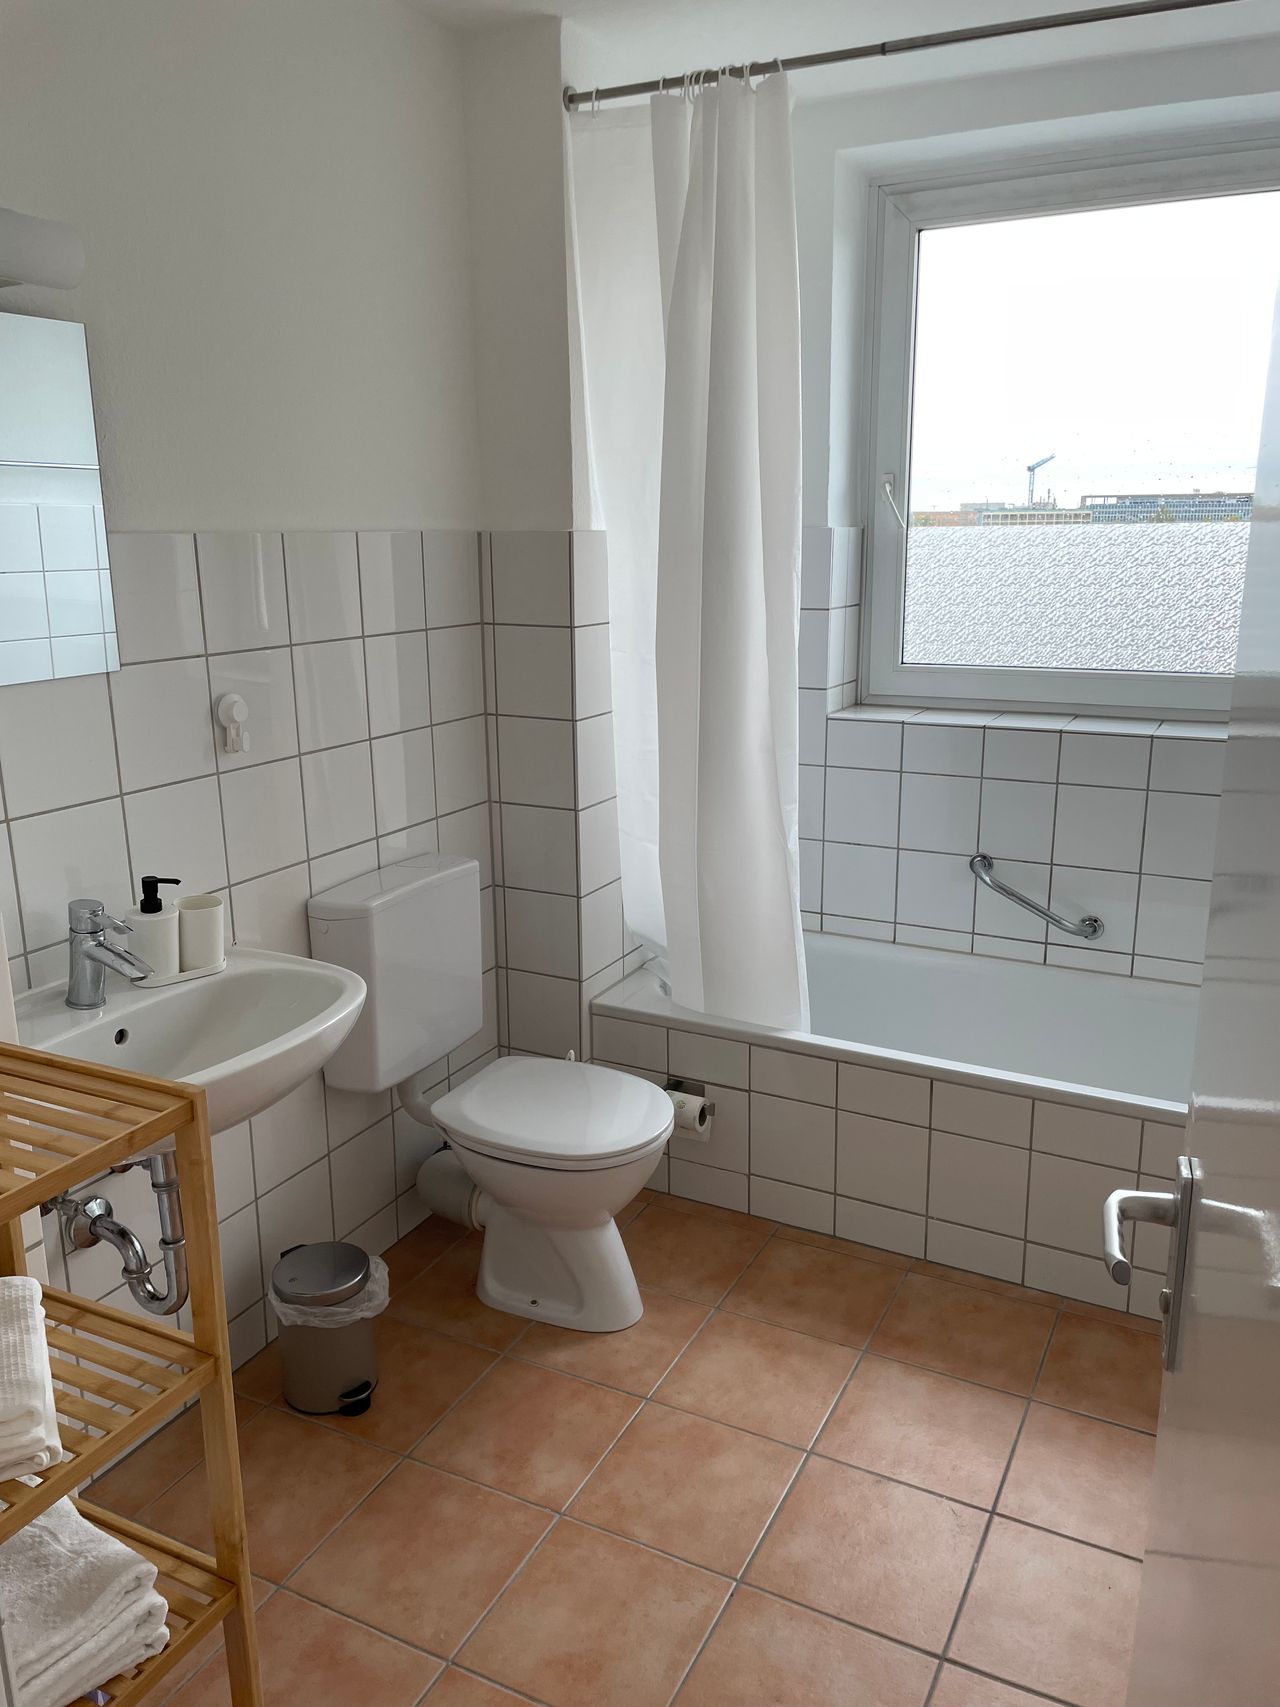 Fashionable, bright flat located in Mainz